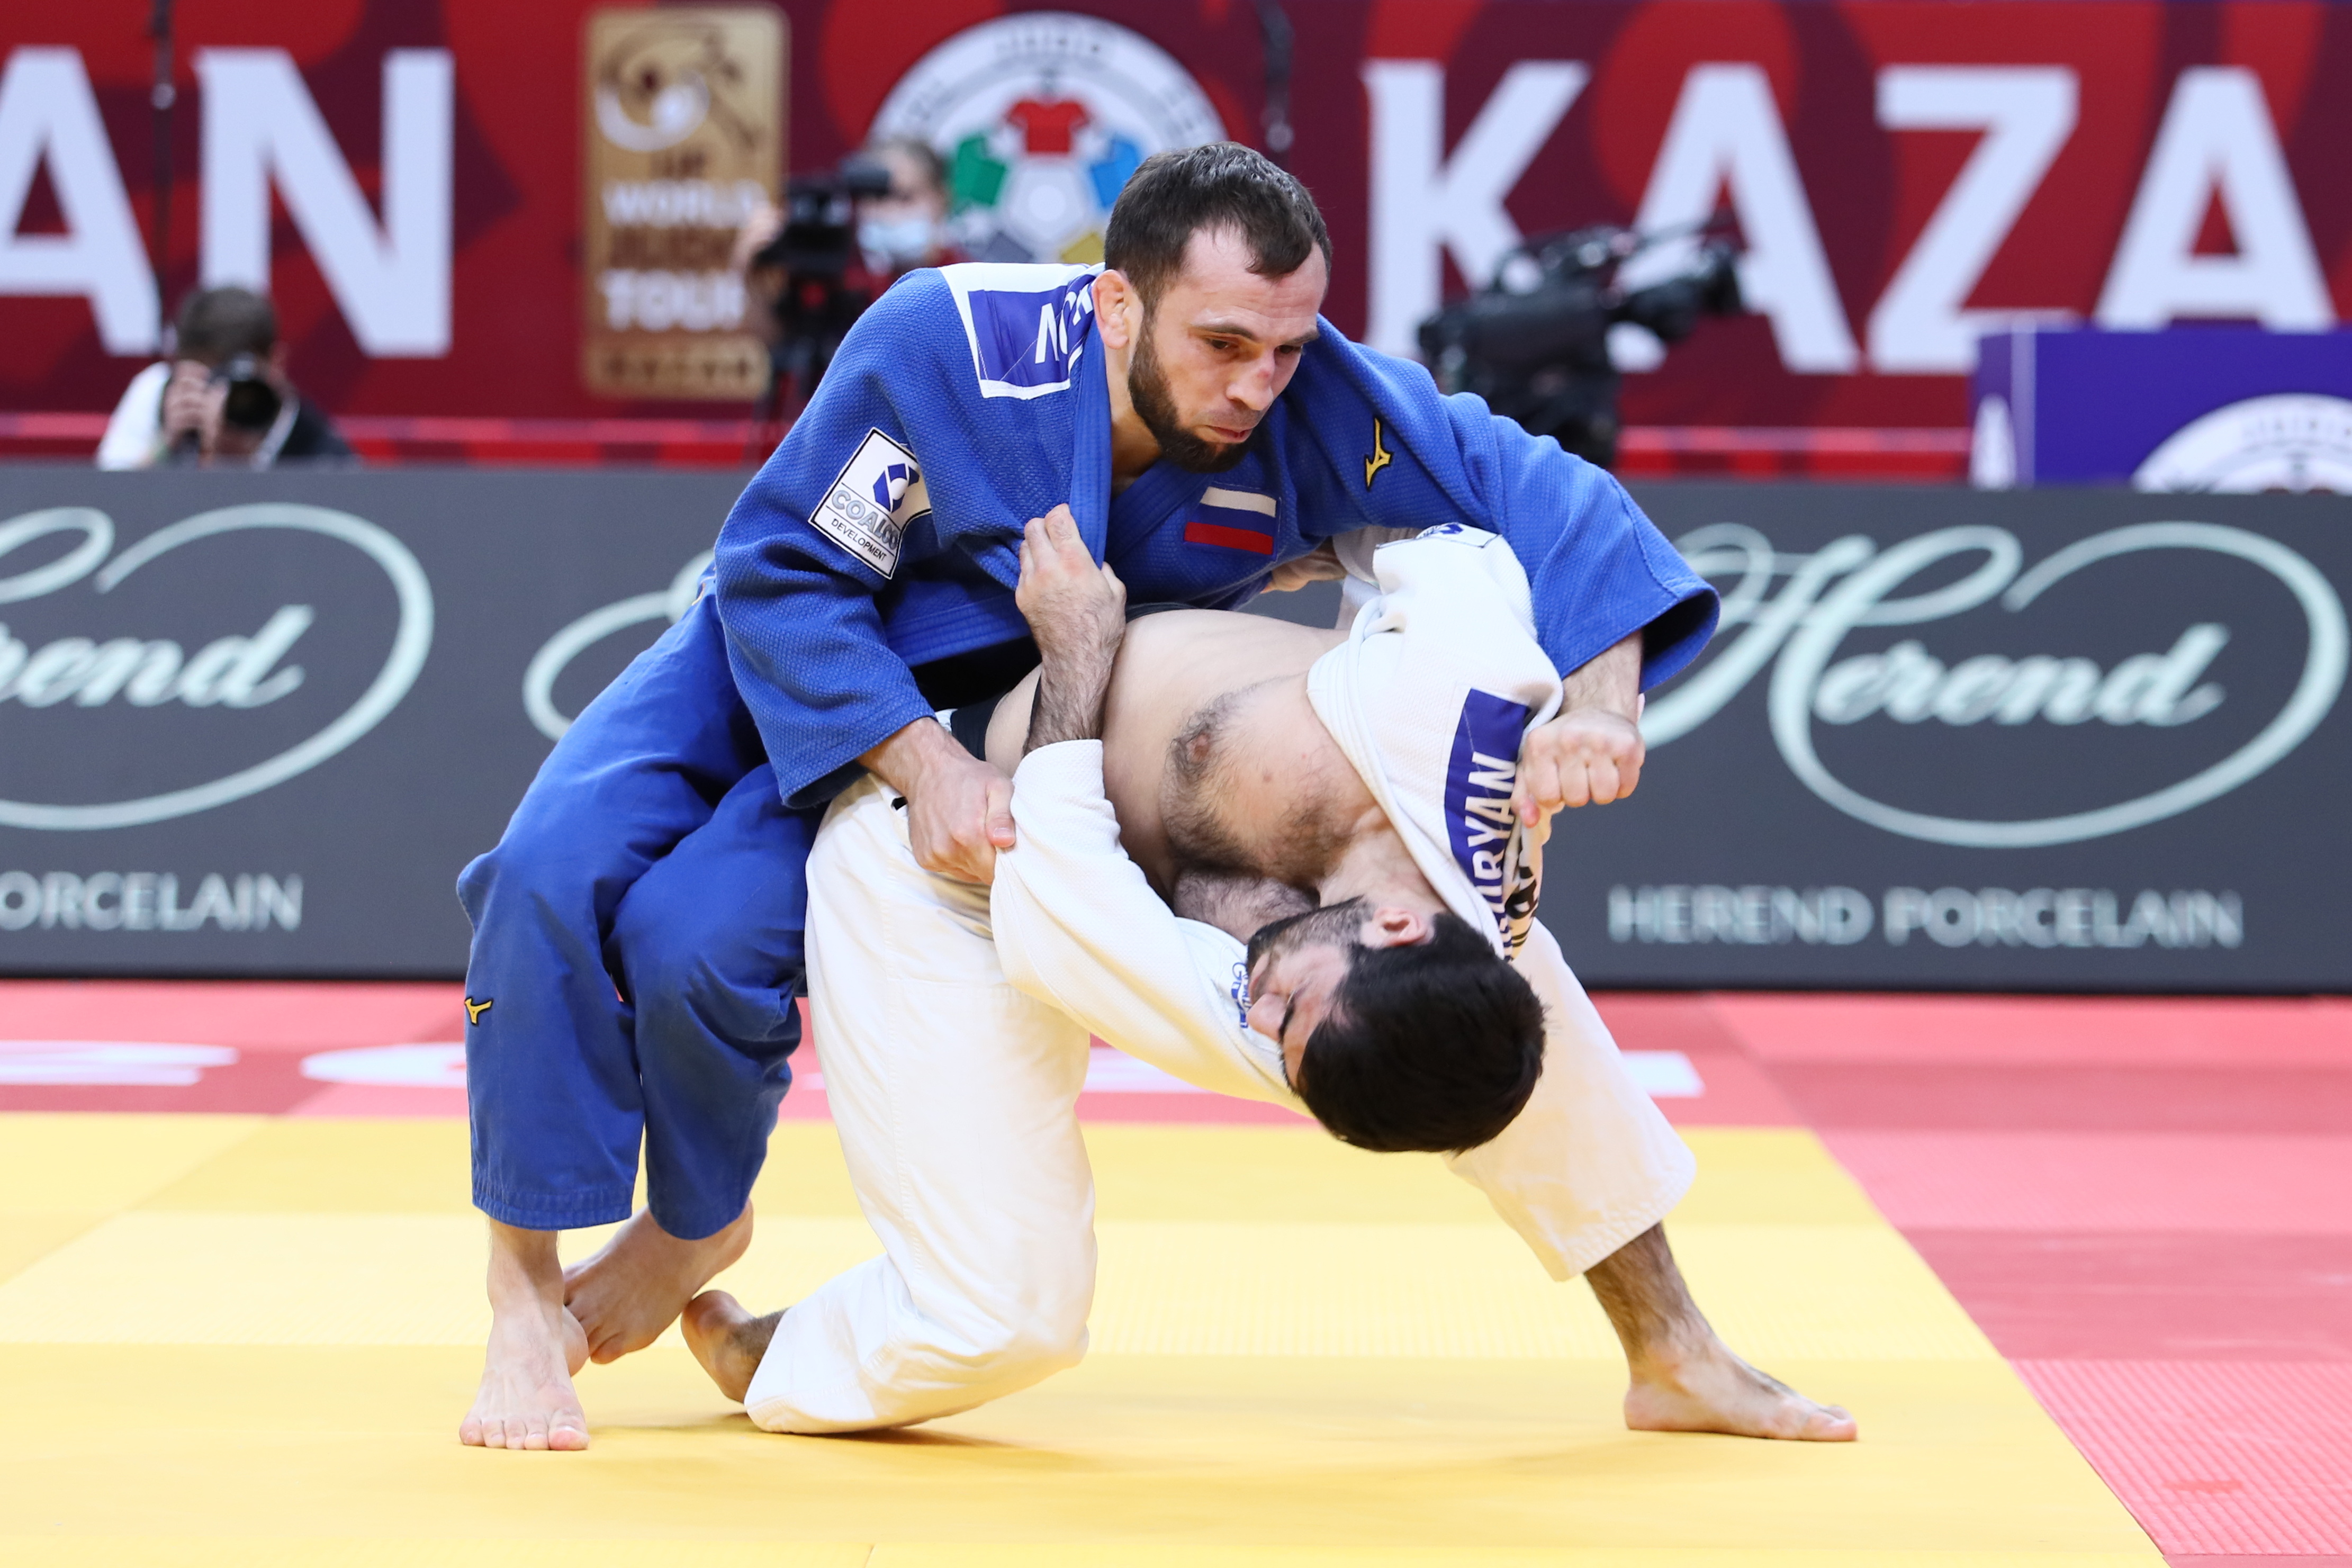 First medalists of Kazan Grand Slam 2021 determined